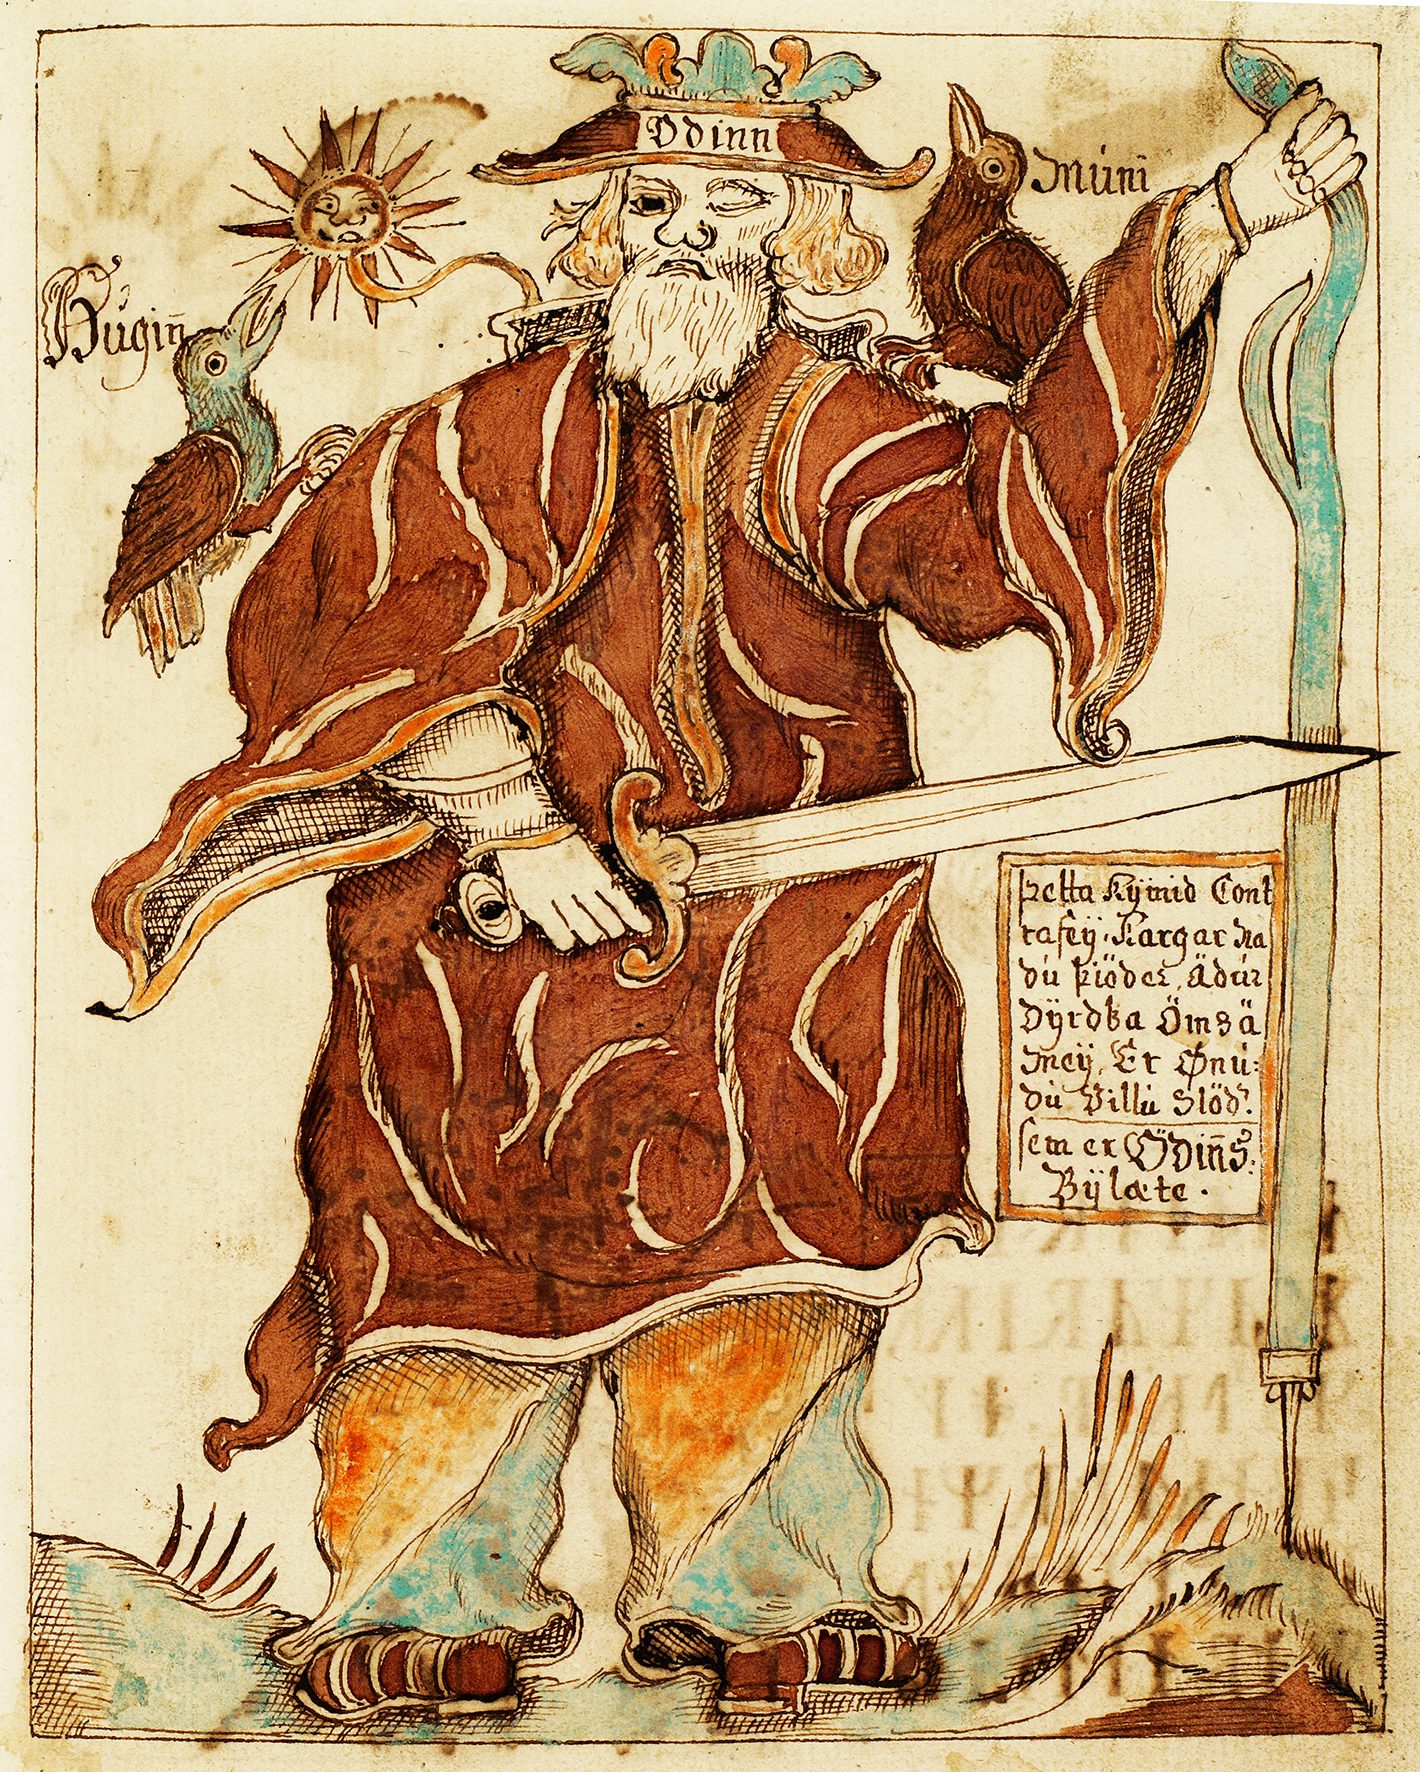 An medieval illustration of Odin with his raven on his shoulder.